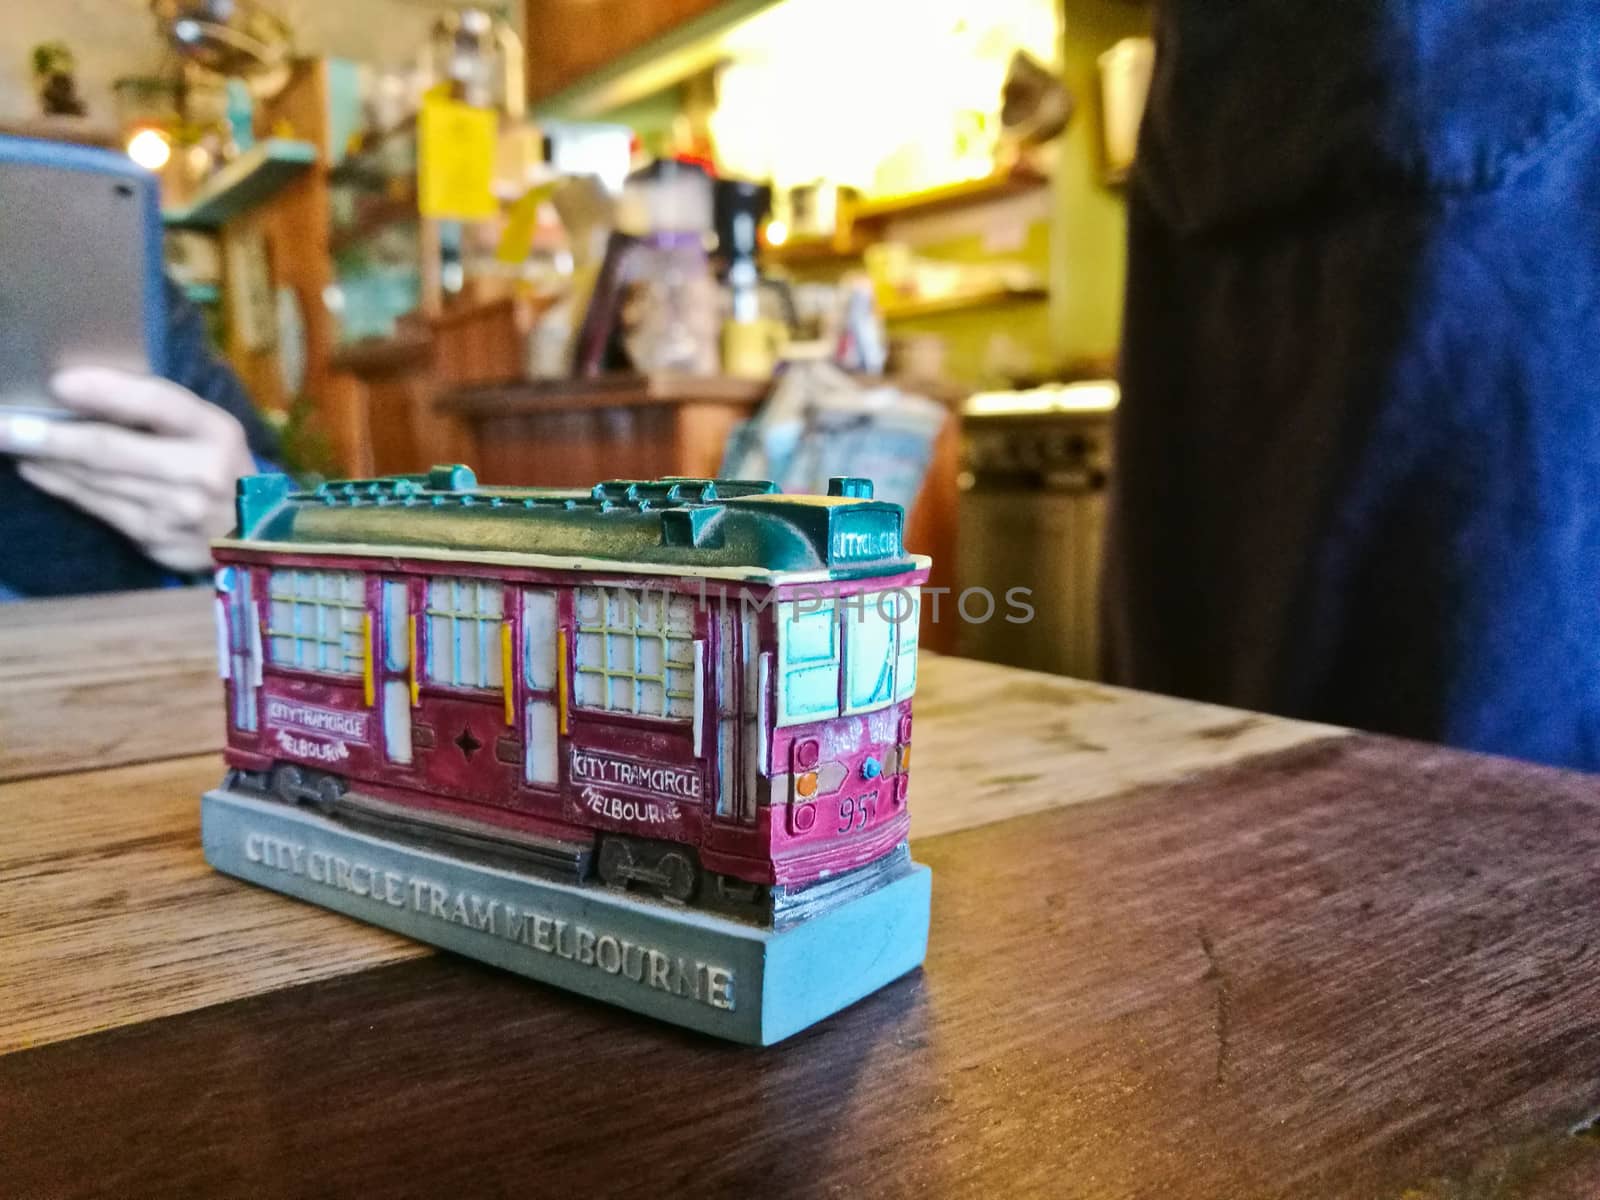 Little tiny Melbourne toy model in a cozy restaurant with many p by eyeofpaul